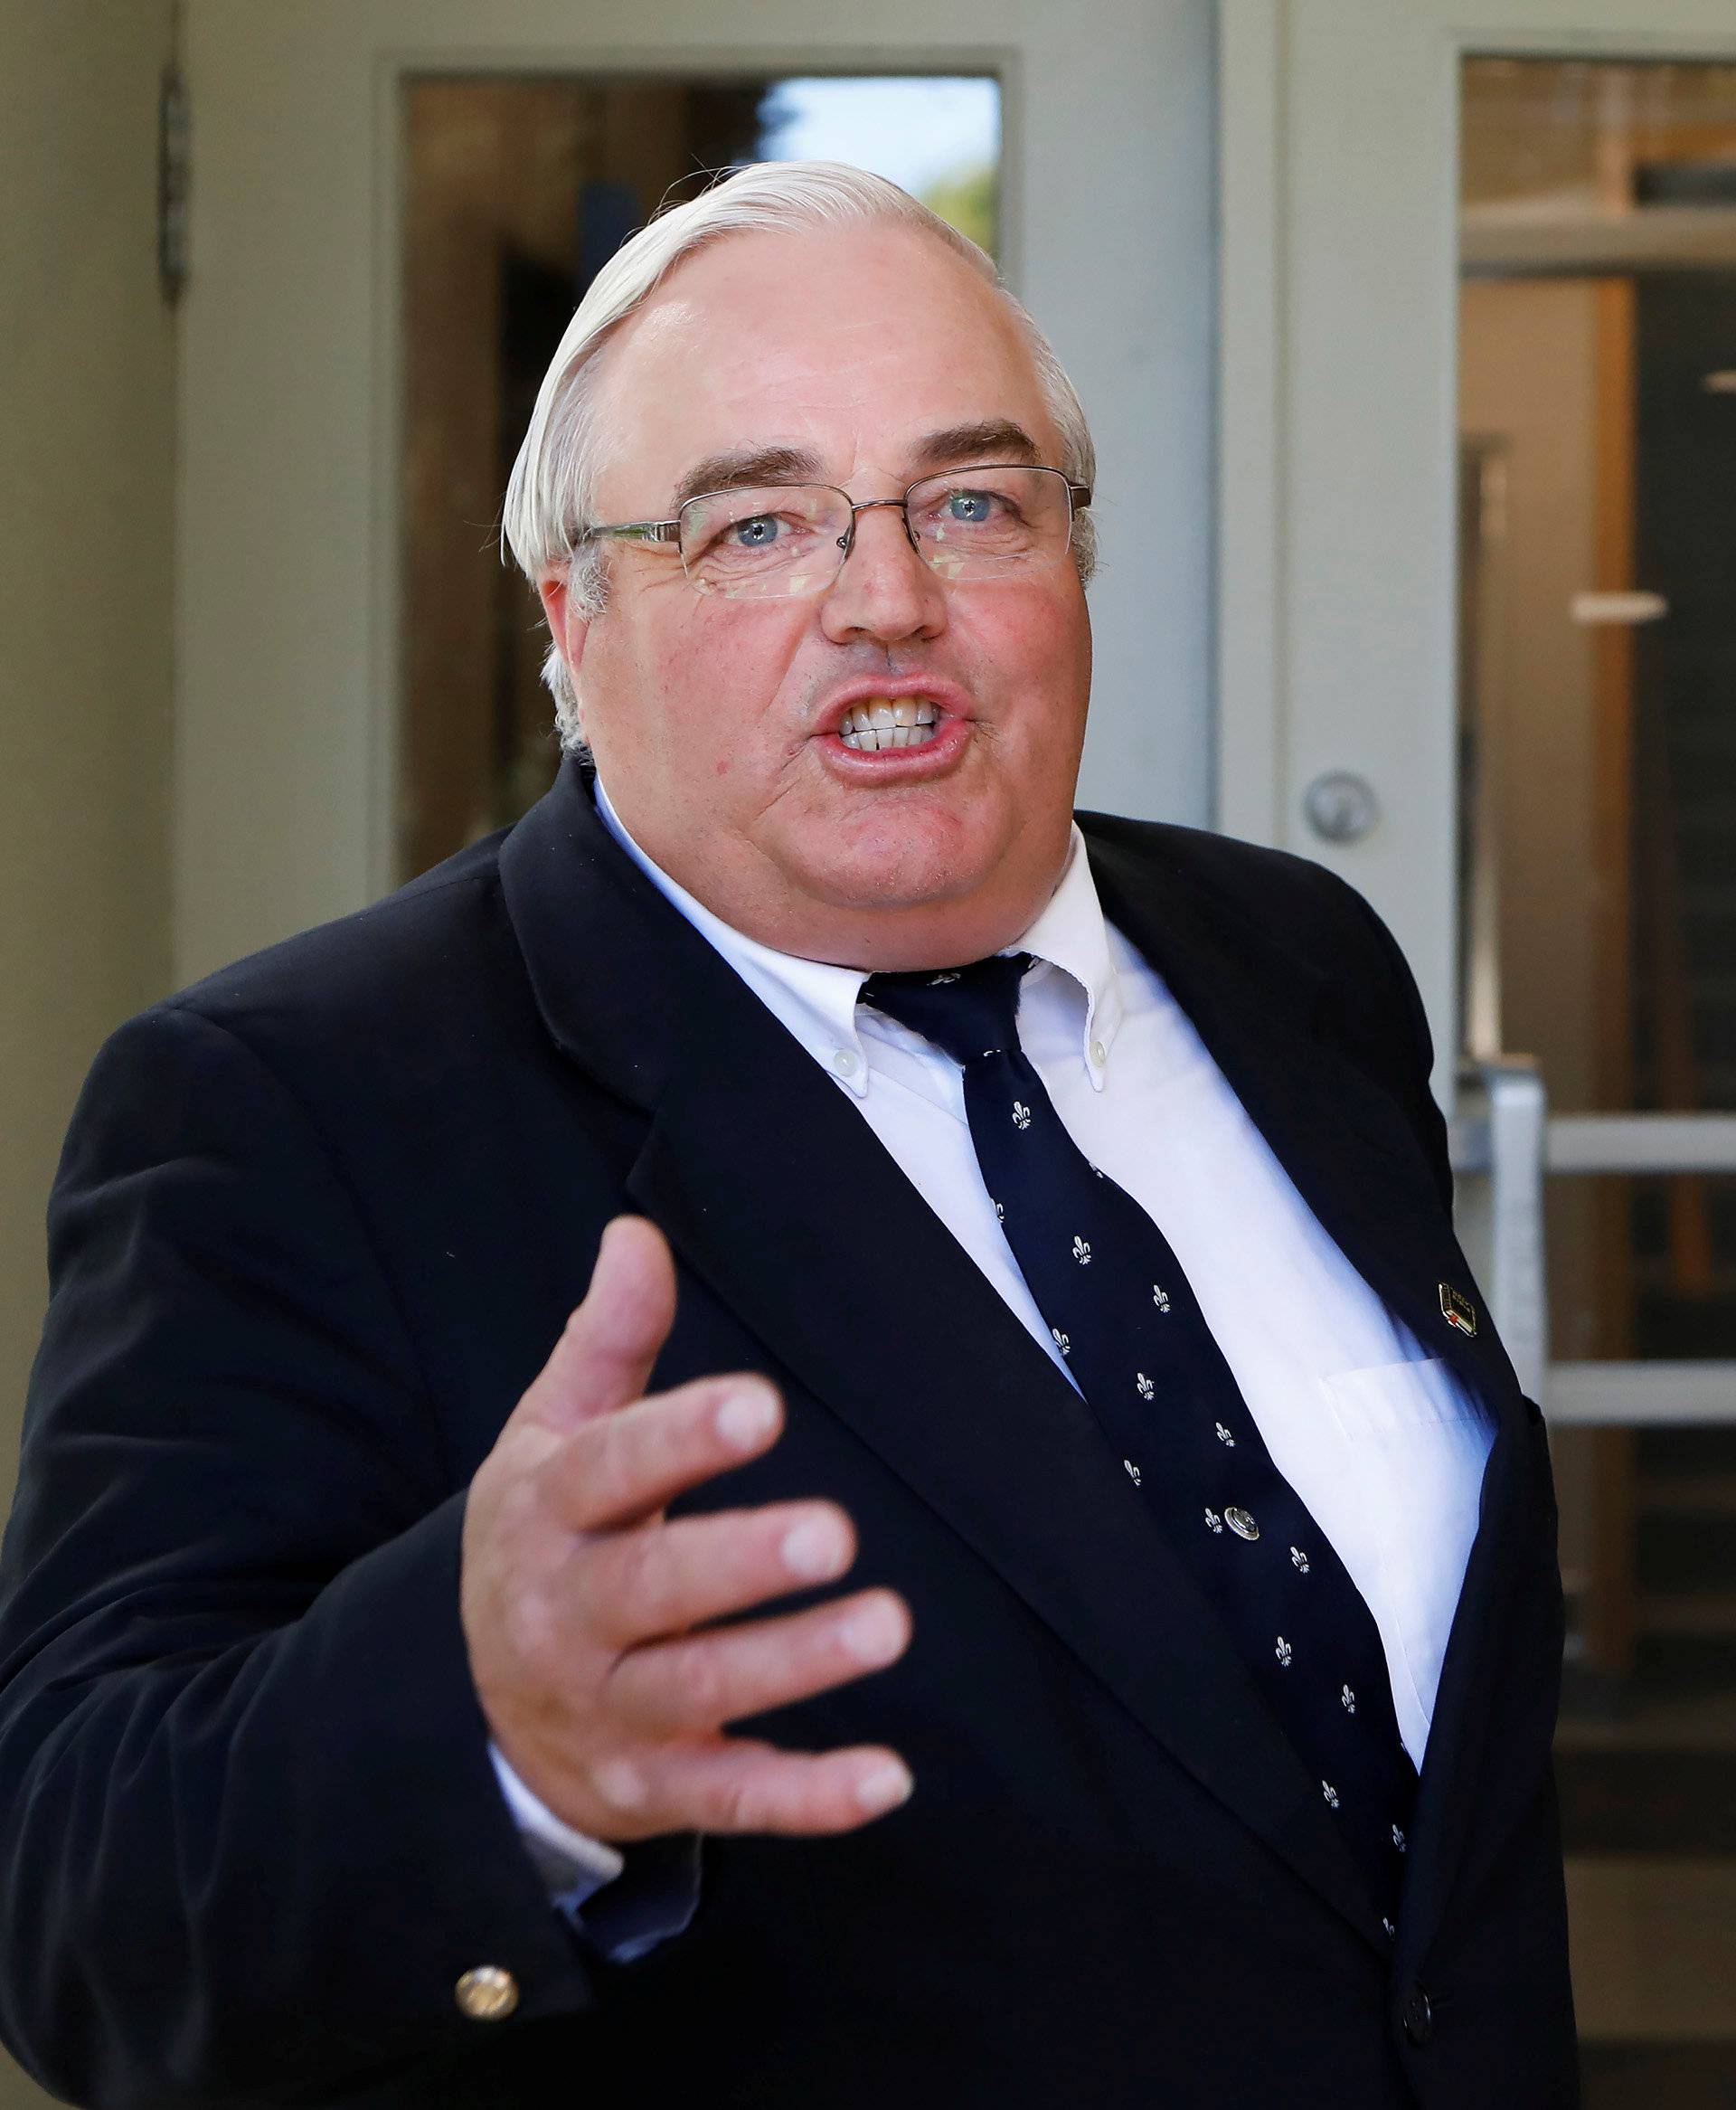 Blackmore speaks to reporters after a Canadian court found the former leader of a breakaway religious sect guilty of practicing polygamy, in Cranbrook.